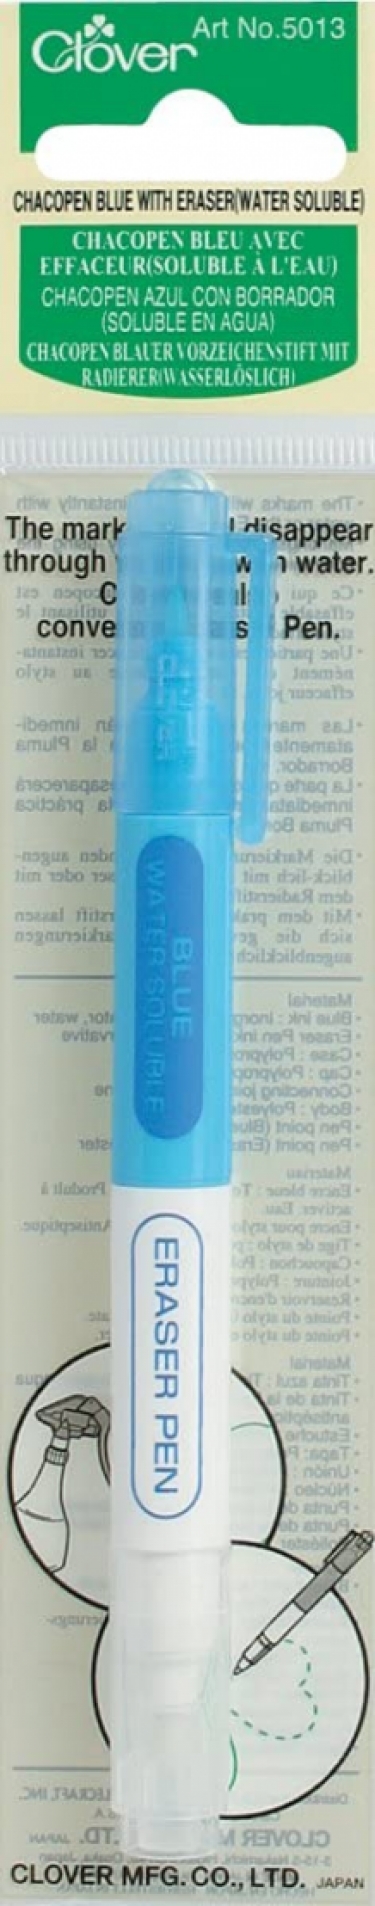 Chacopen blue with eraser